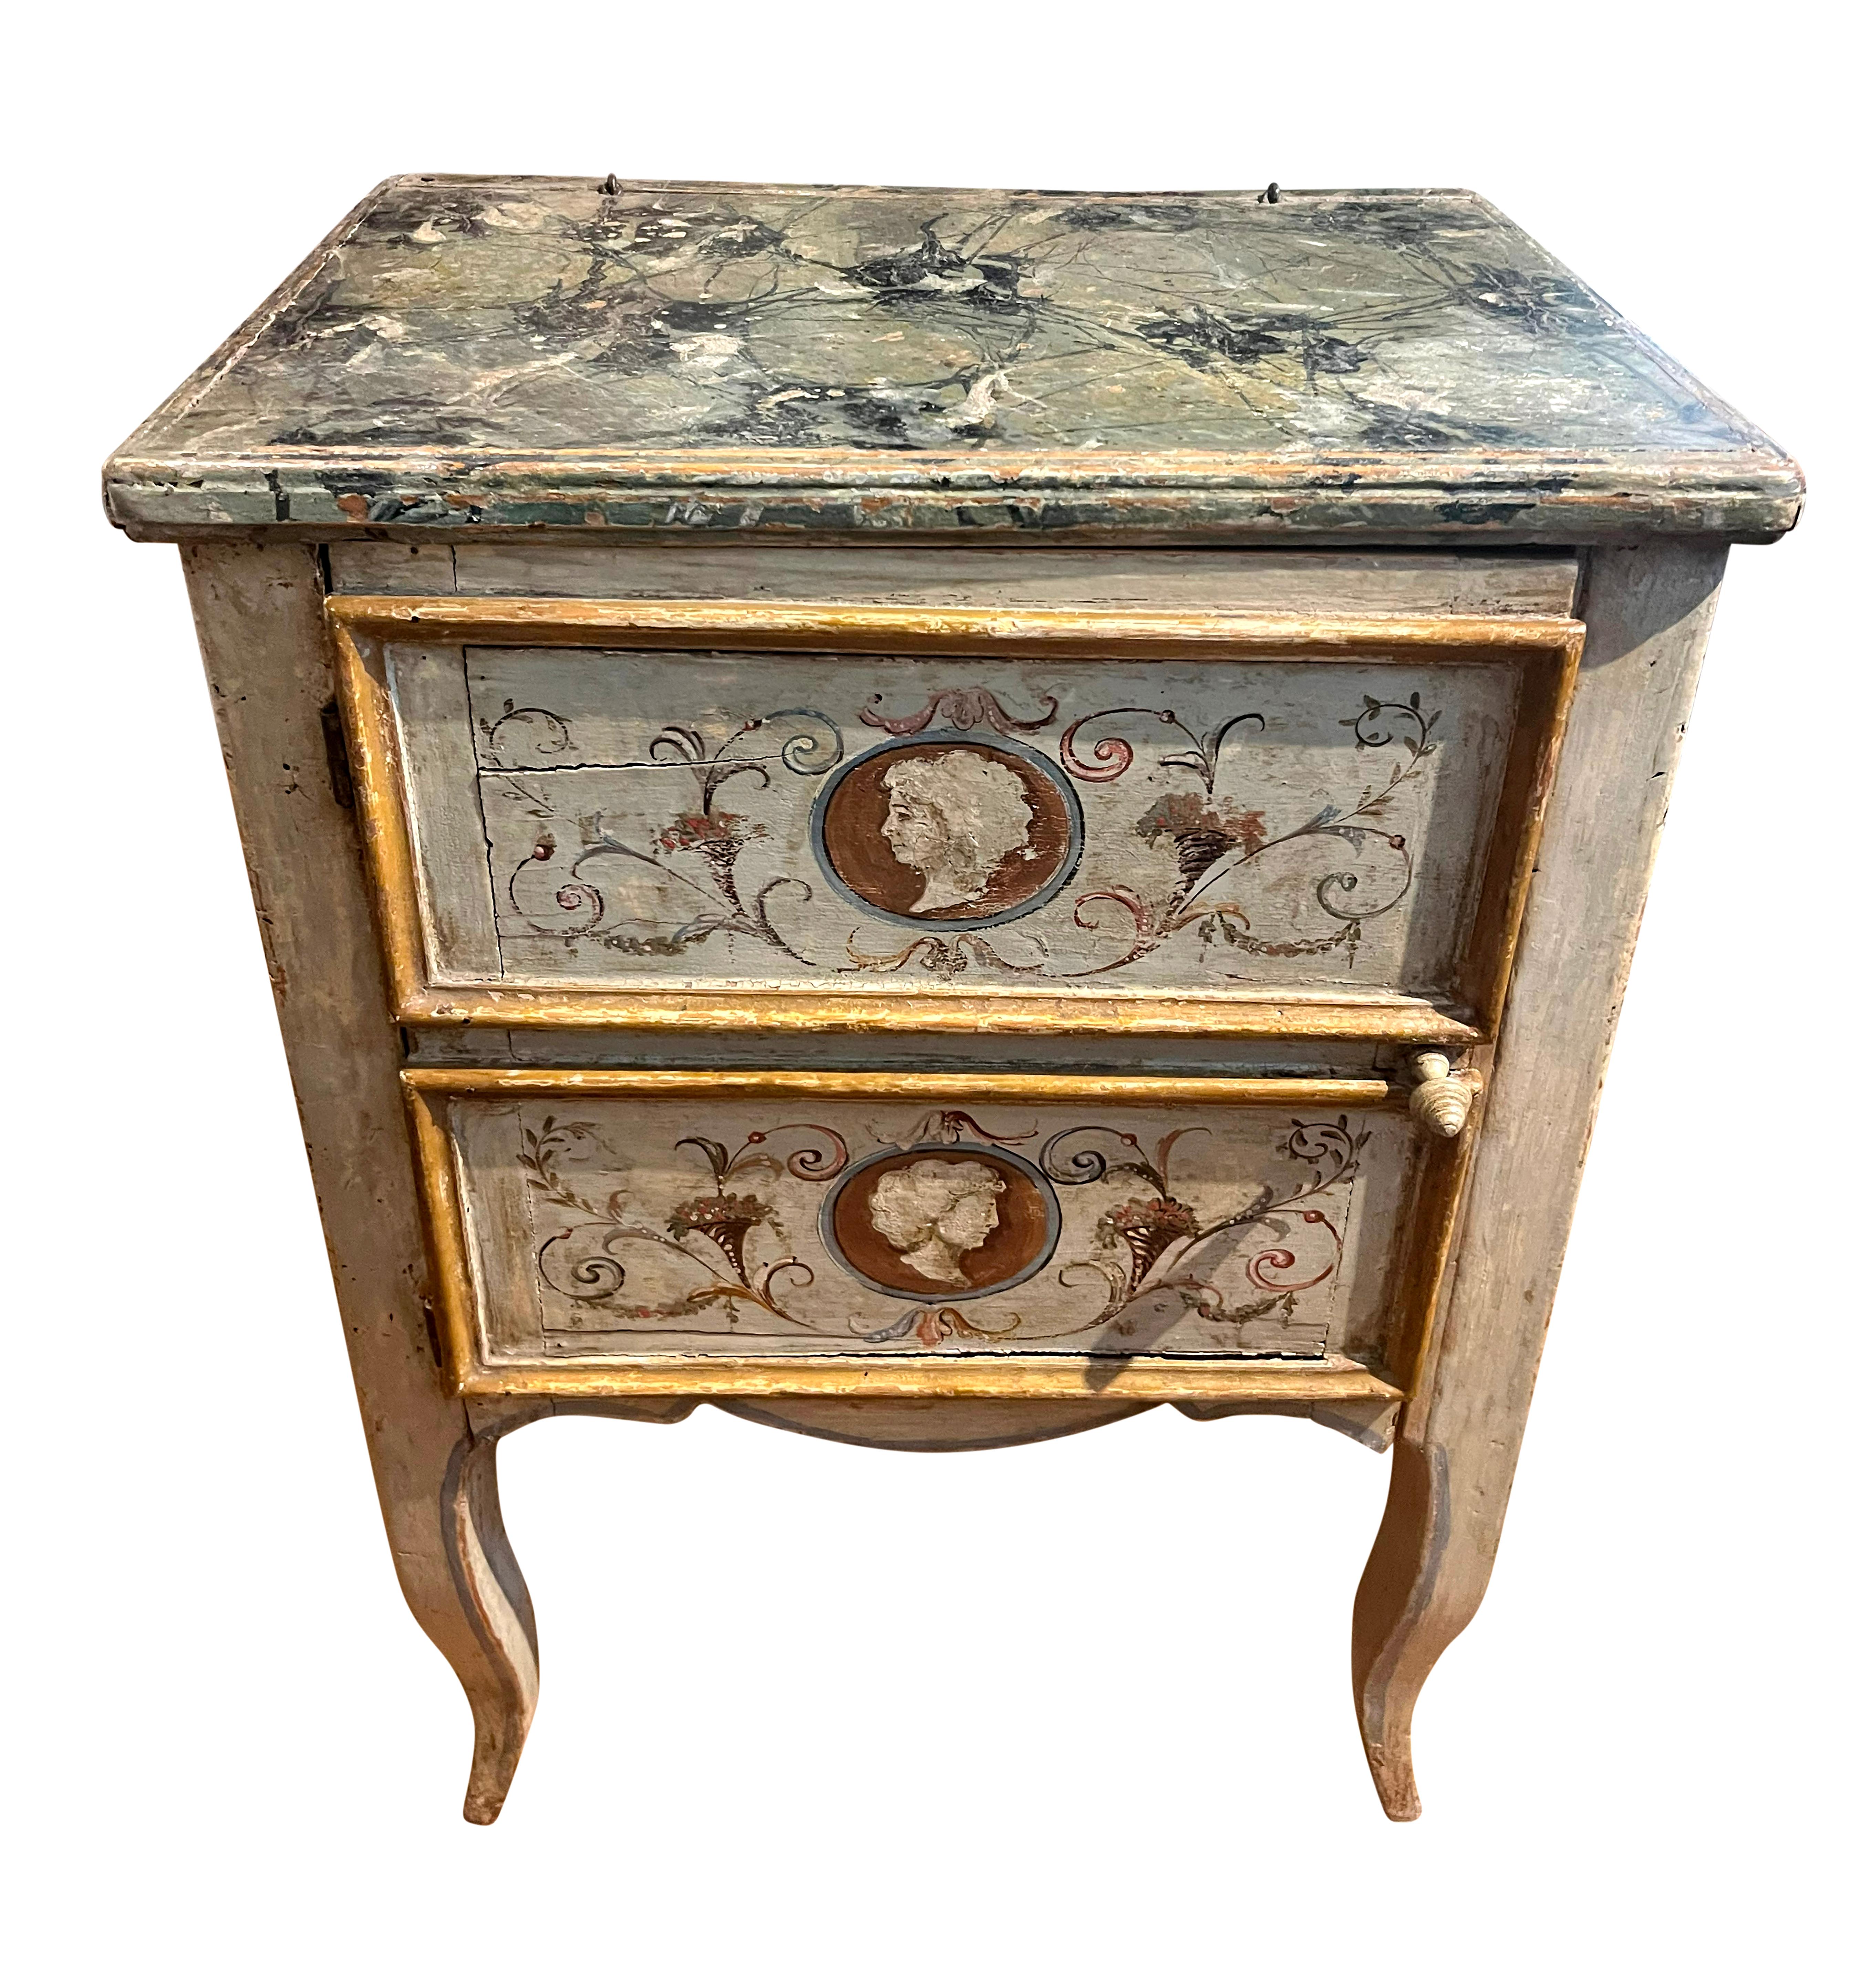 With rectangular faux marble top over a door with enclosed shelf, raised on cabriole legs. Original painted decoration.